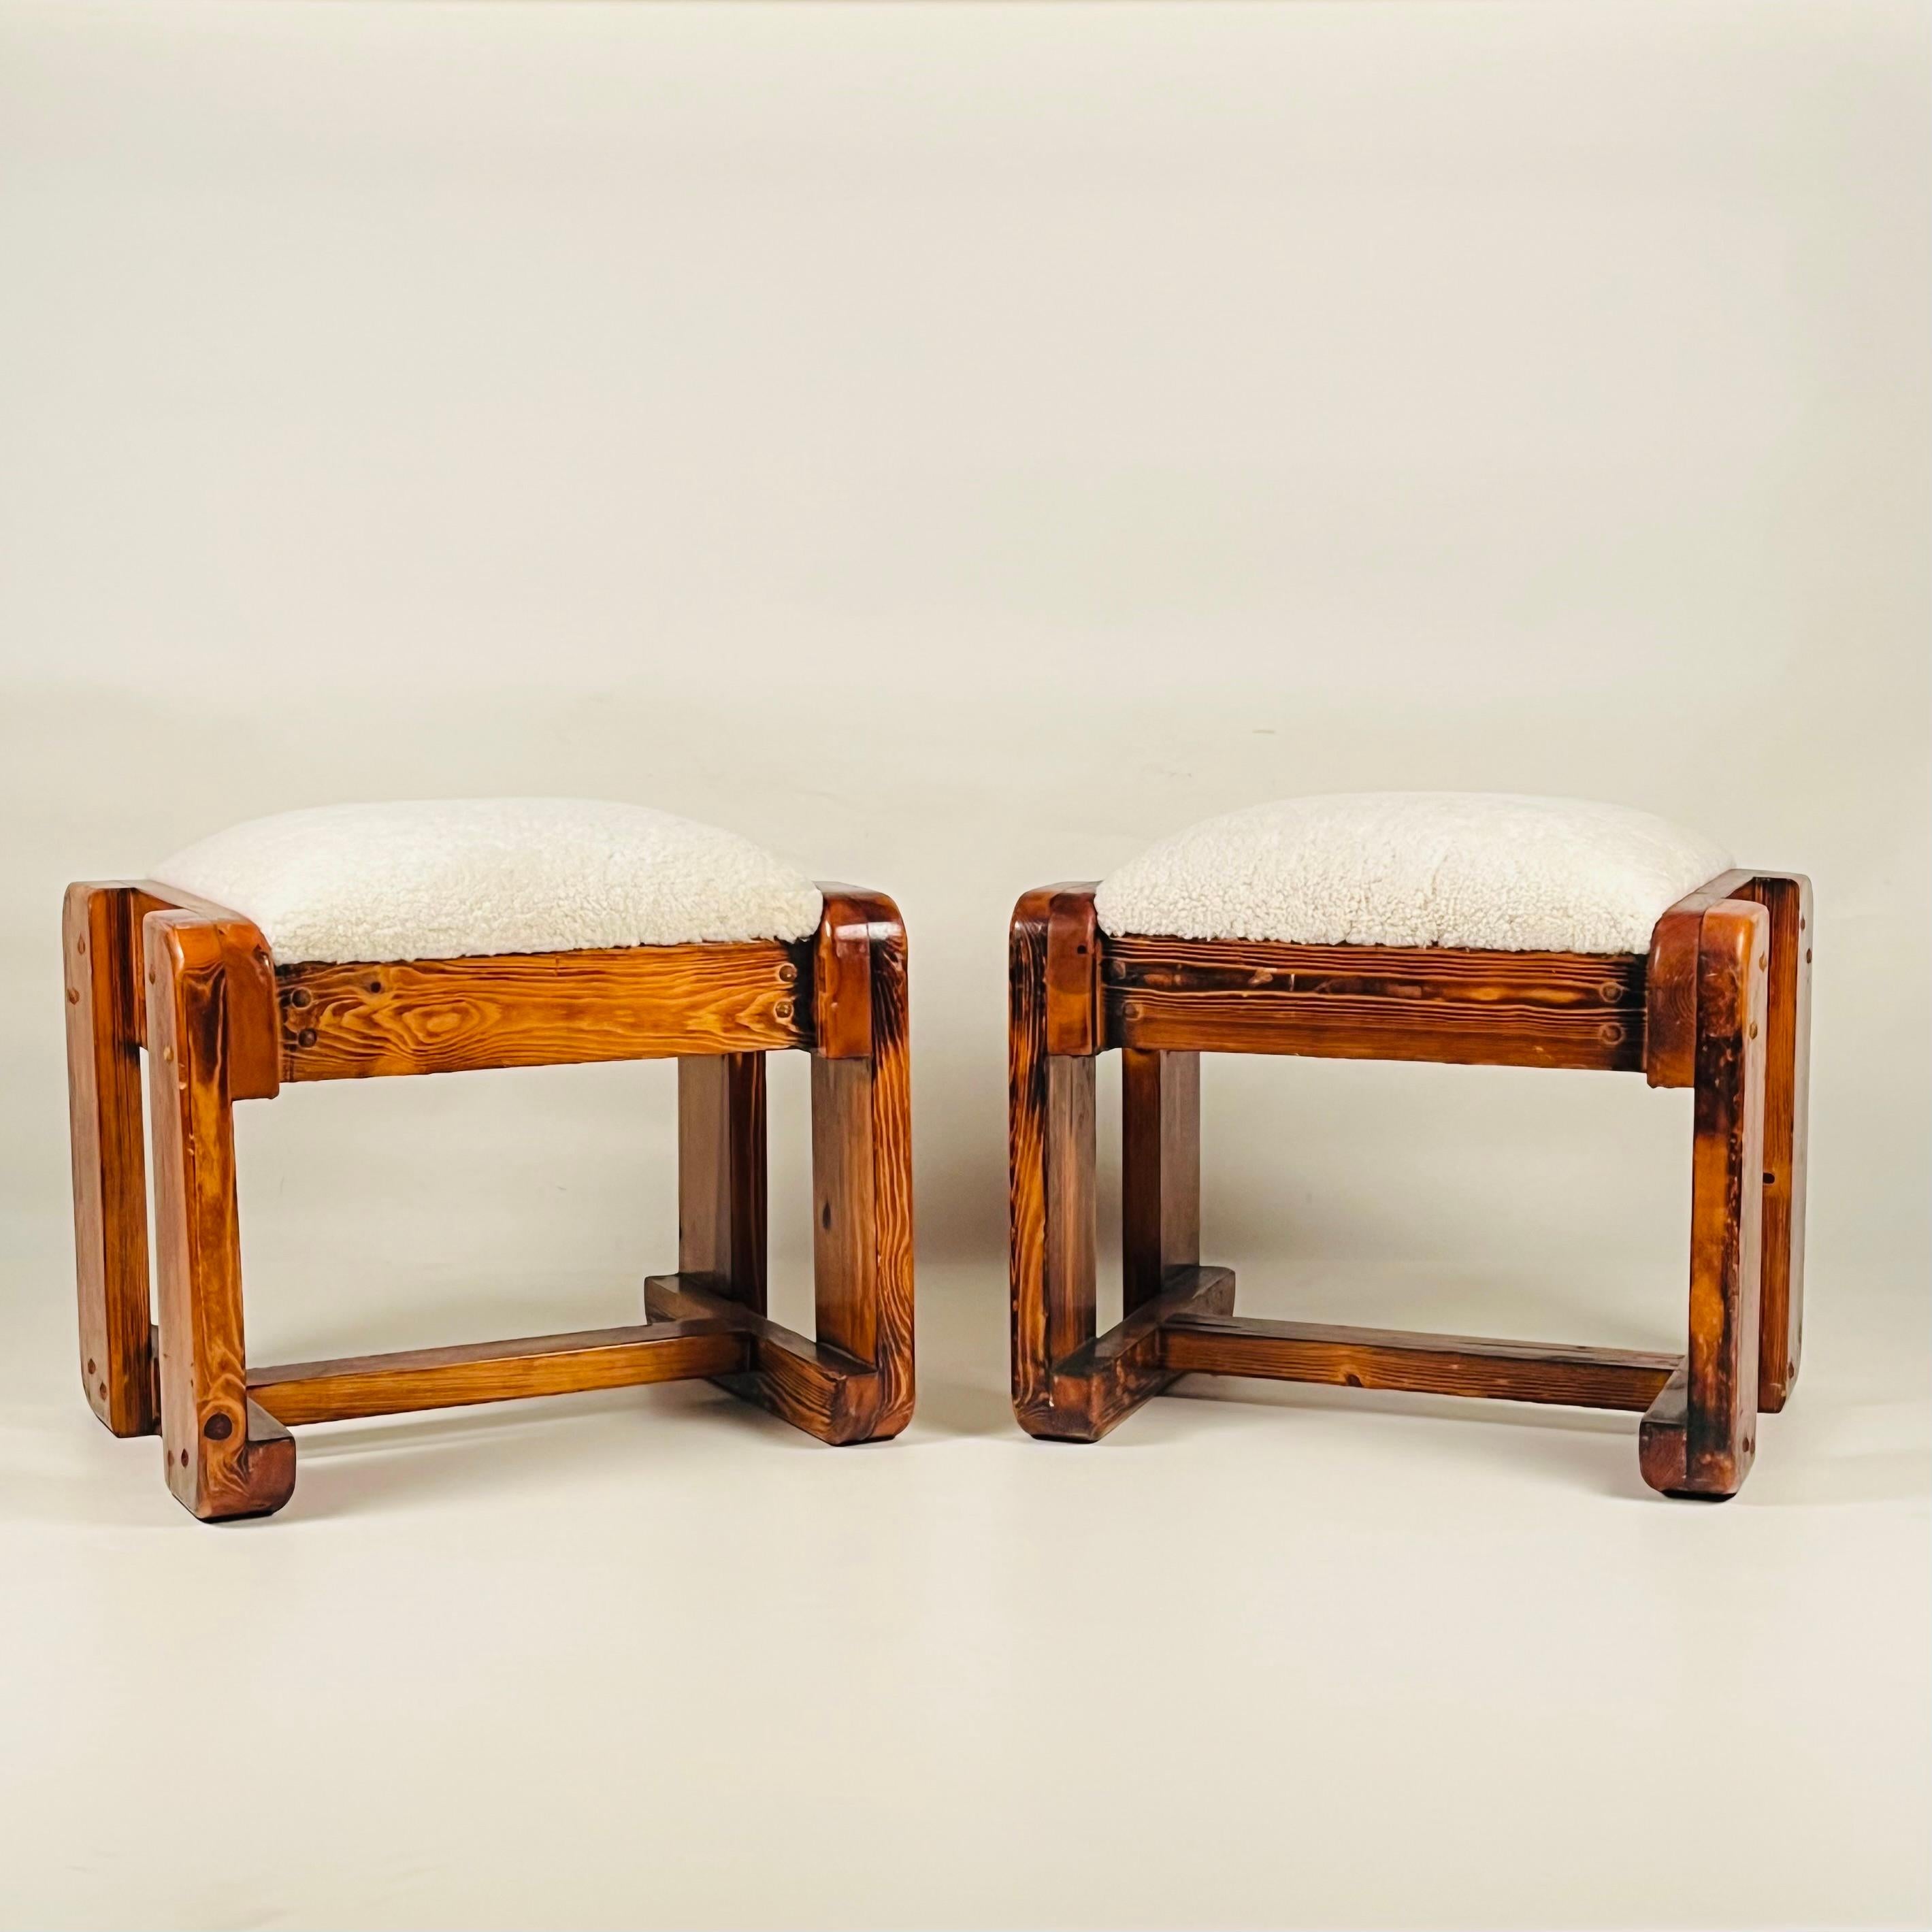 These charming vintage stools crafted from robust pine wood have been given a new lease of life with a recent reupholstering in plush shearling. Their rustic charm and cozy appeal make them a perfect addition to any living room or bedroom setup. 
